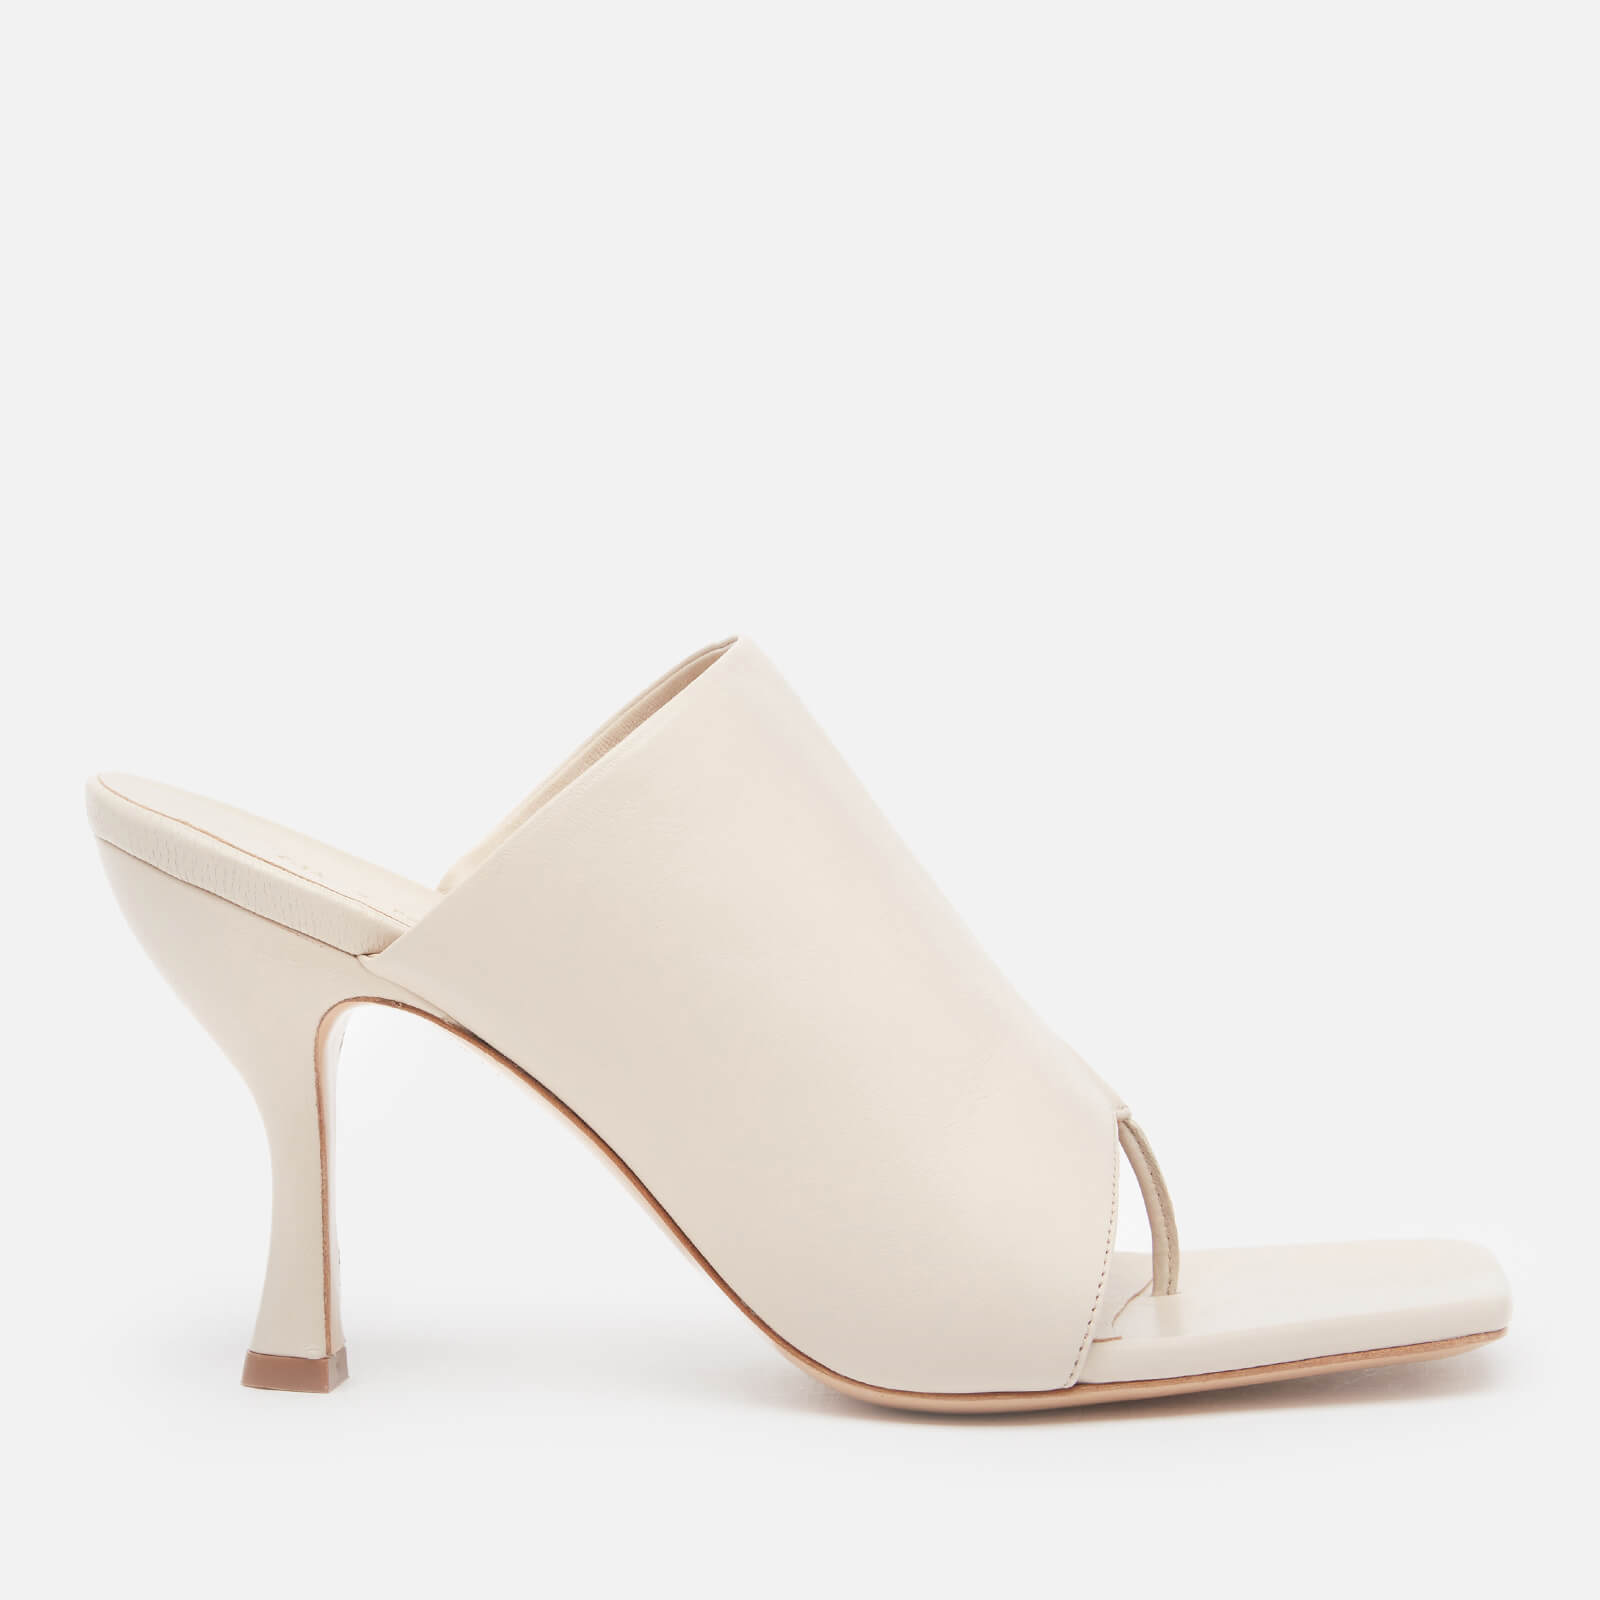 Gia Couture X Pernille Women's Perni 80mm Leather Toe Post Heeled Mules - Cream Leather - UK 3